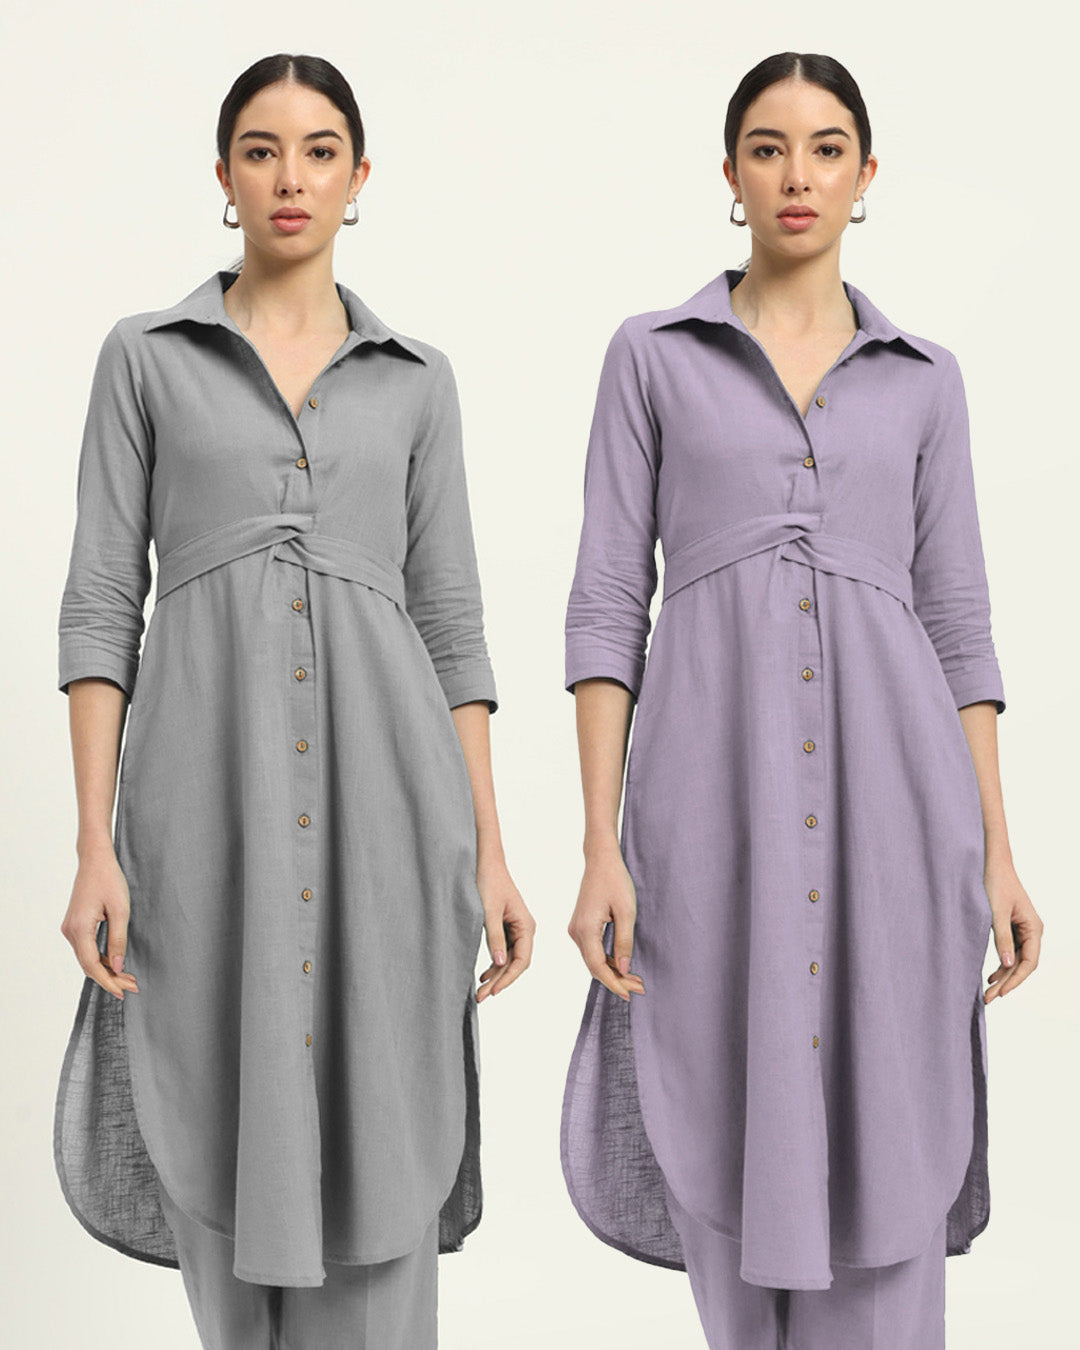 Combo: Iced Grey & Lilac Bellisimo Belted Solid Kurta